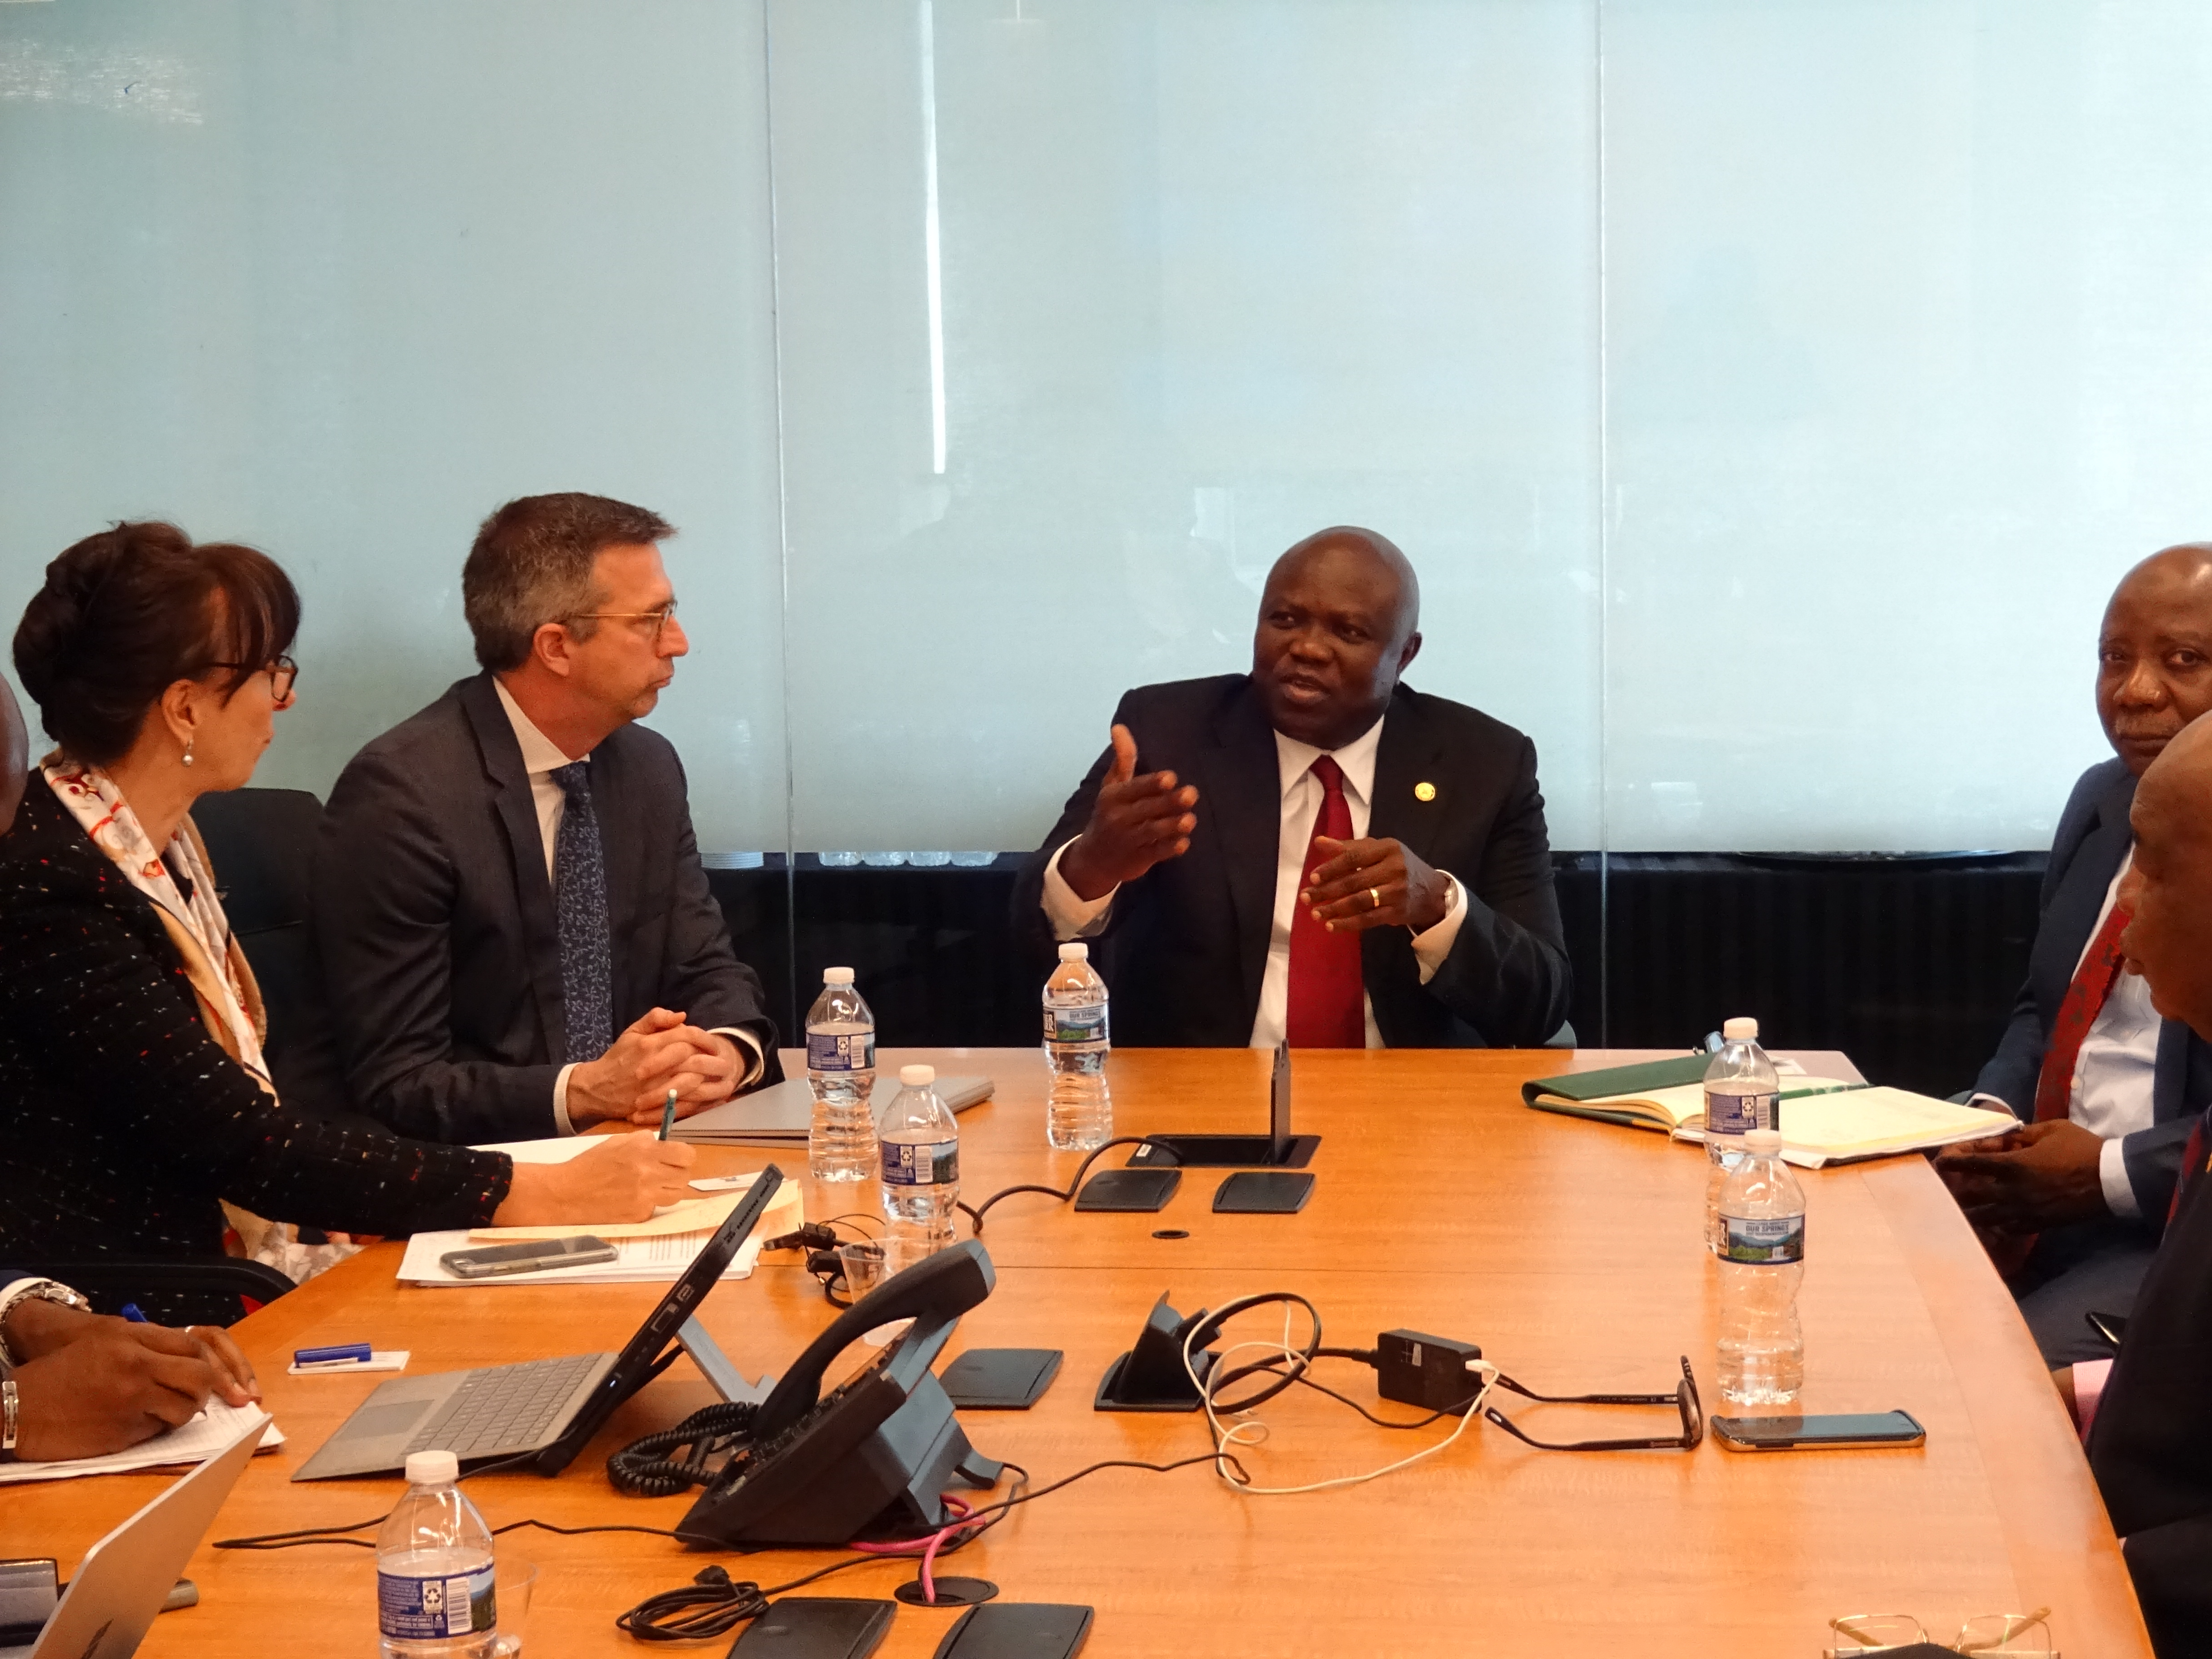 Gov. Ambode At a meeting with the Senior Executives of Microsoft Corporation in Washington DC